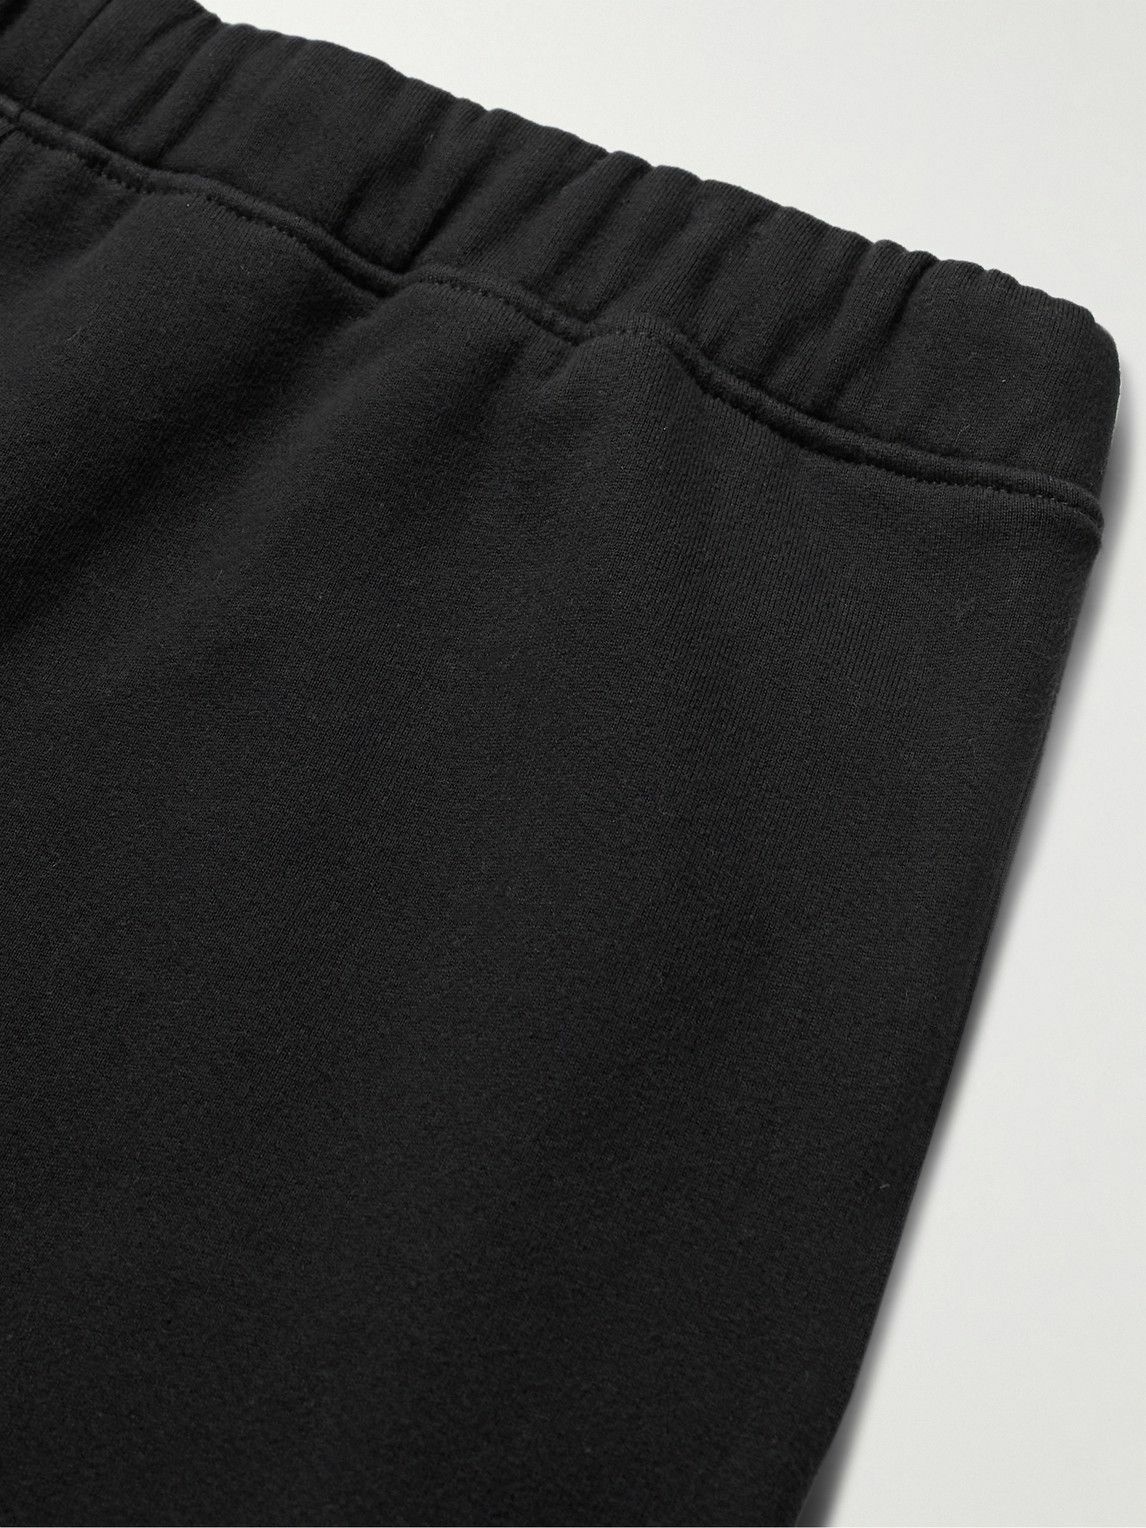 Buy Fear Of God Eternal Tapered Cotton-jersey Sweatpants Xxl - Black At 40%  Off